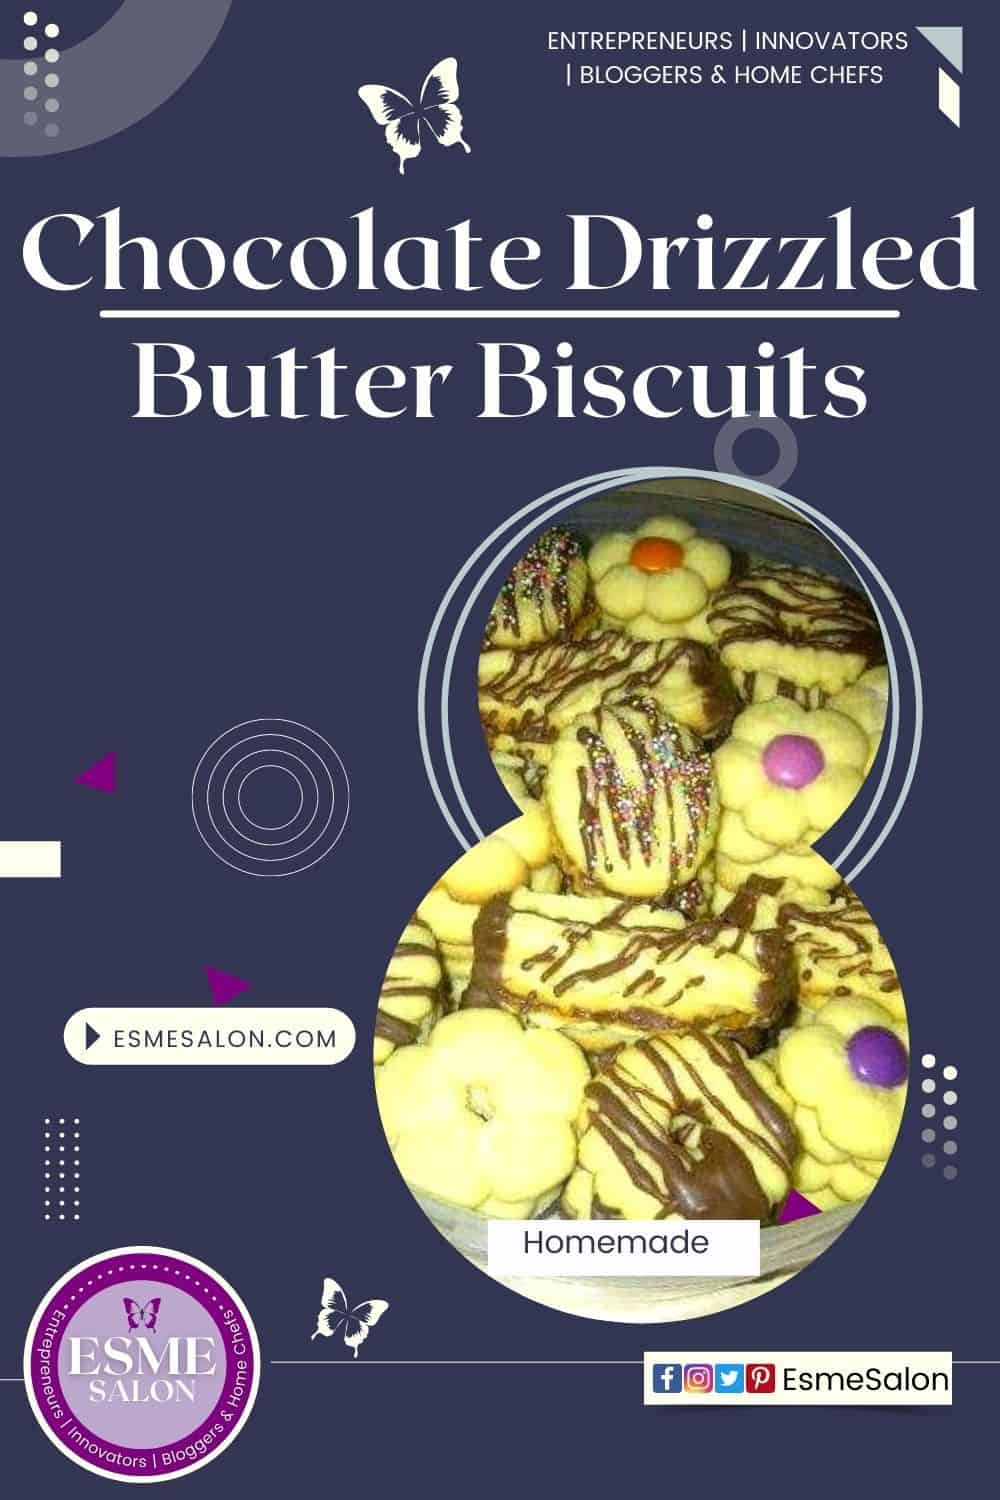 Butter Biscuits and Chocolate Drizzled with added colored candies